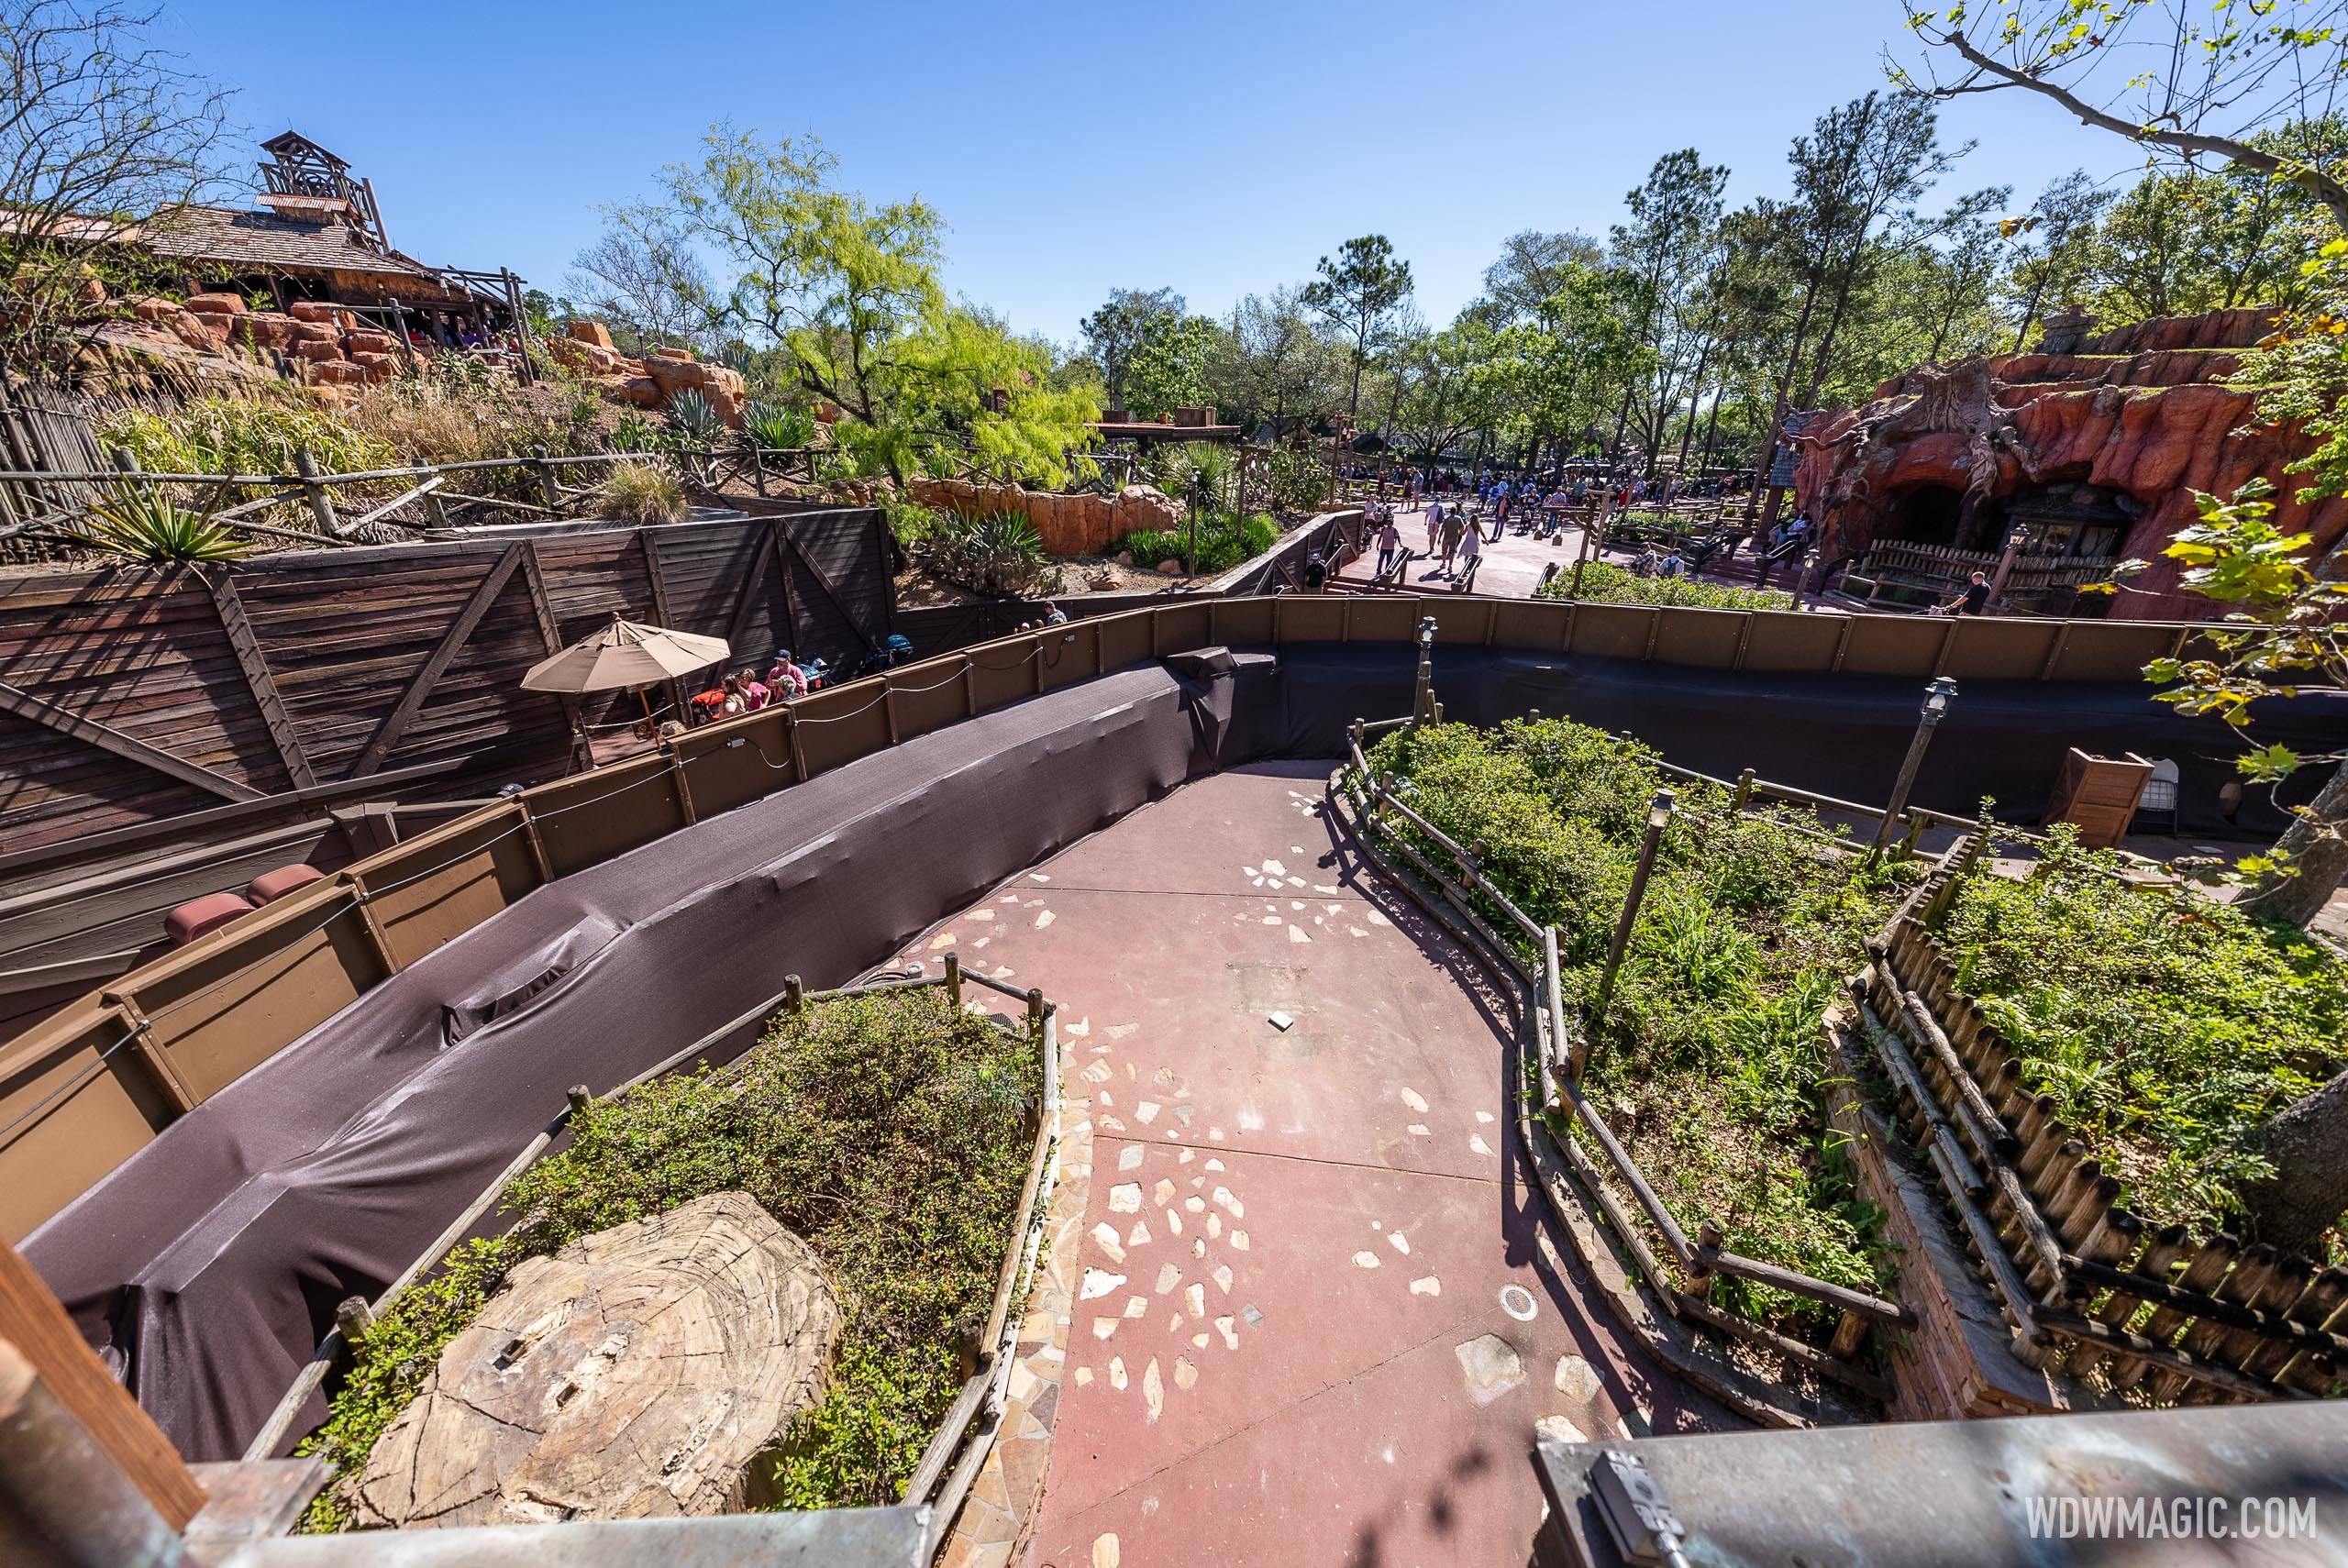 View from the Railroad station at the former Splash Mountain entrance